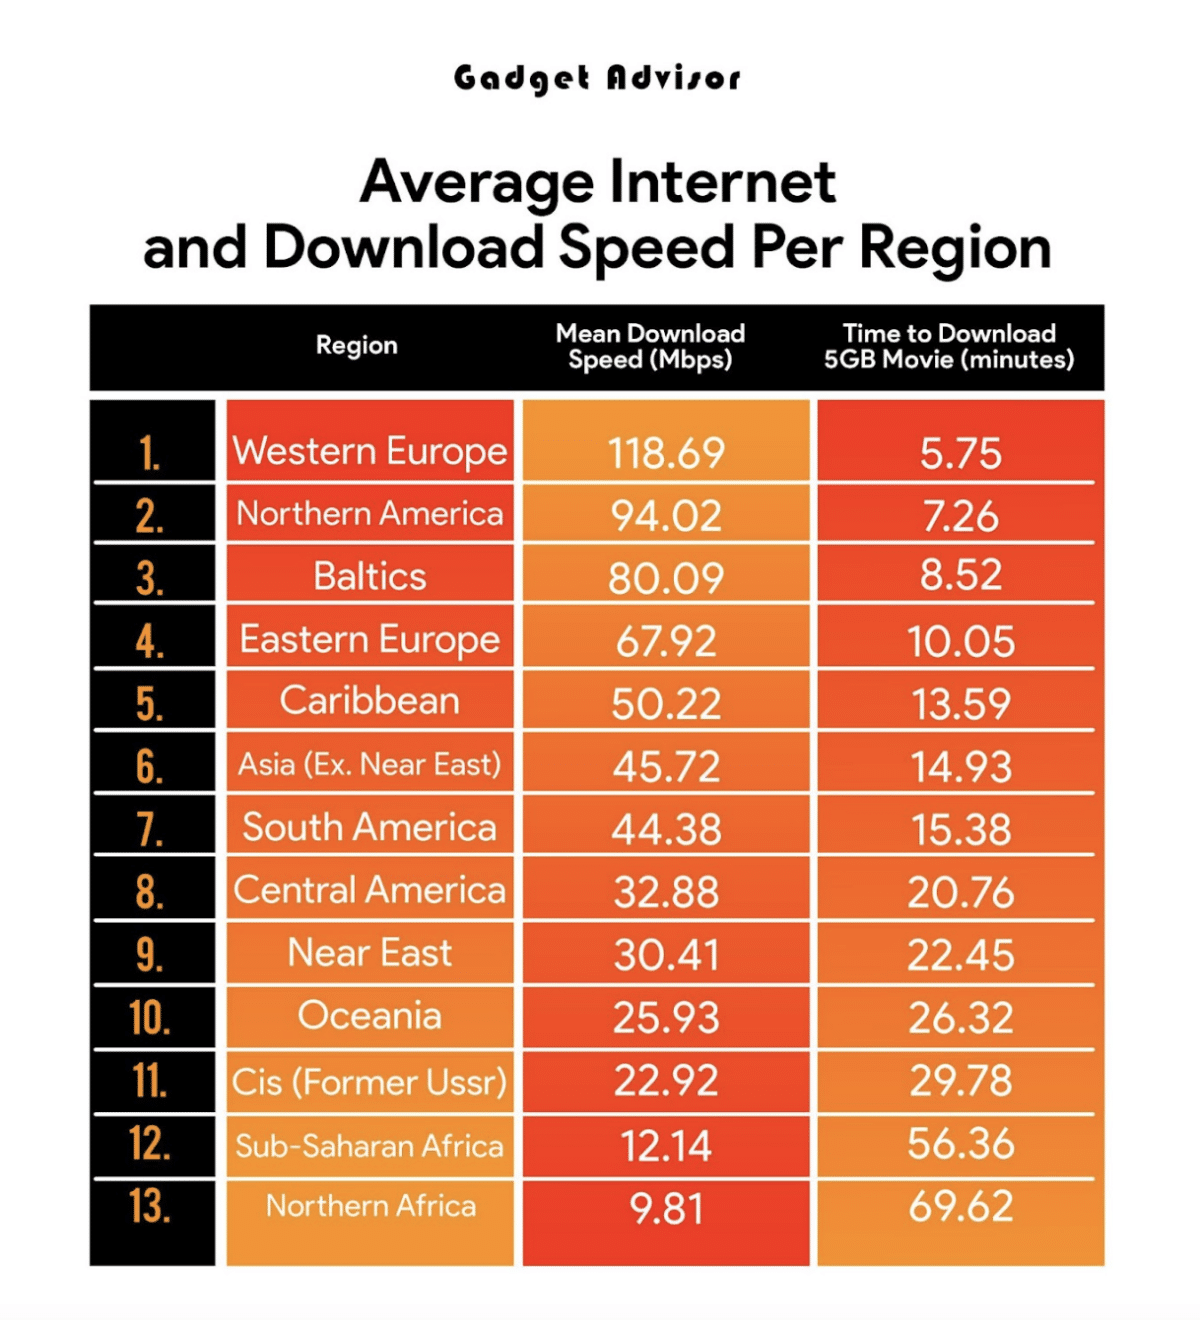 Average Internet Speed and Time to Download 5GB Movie by Region